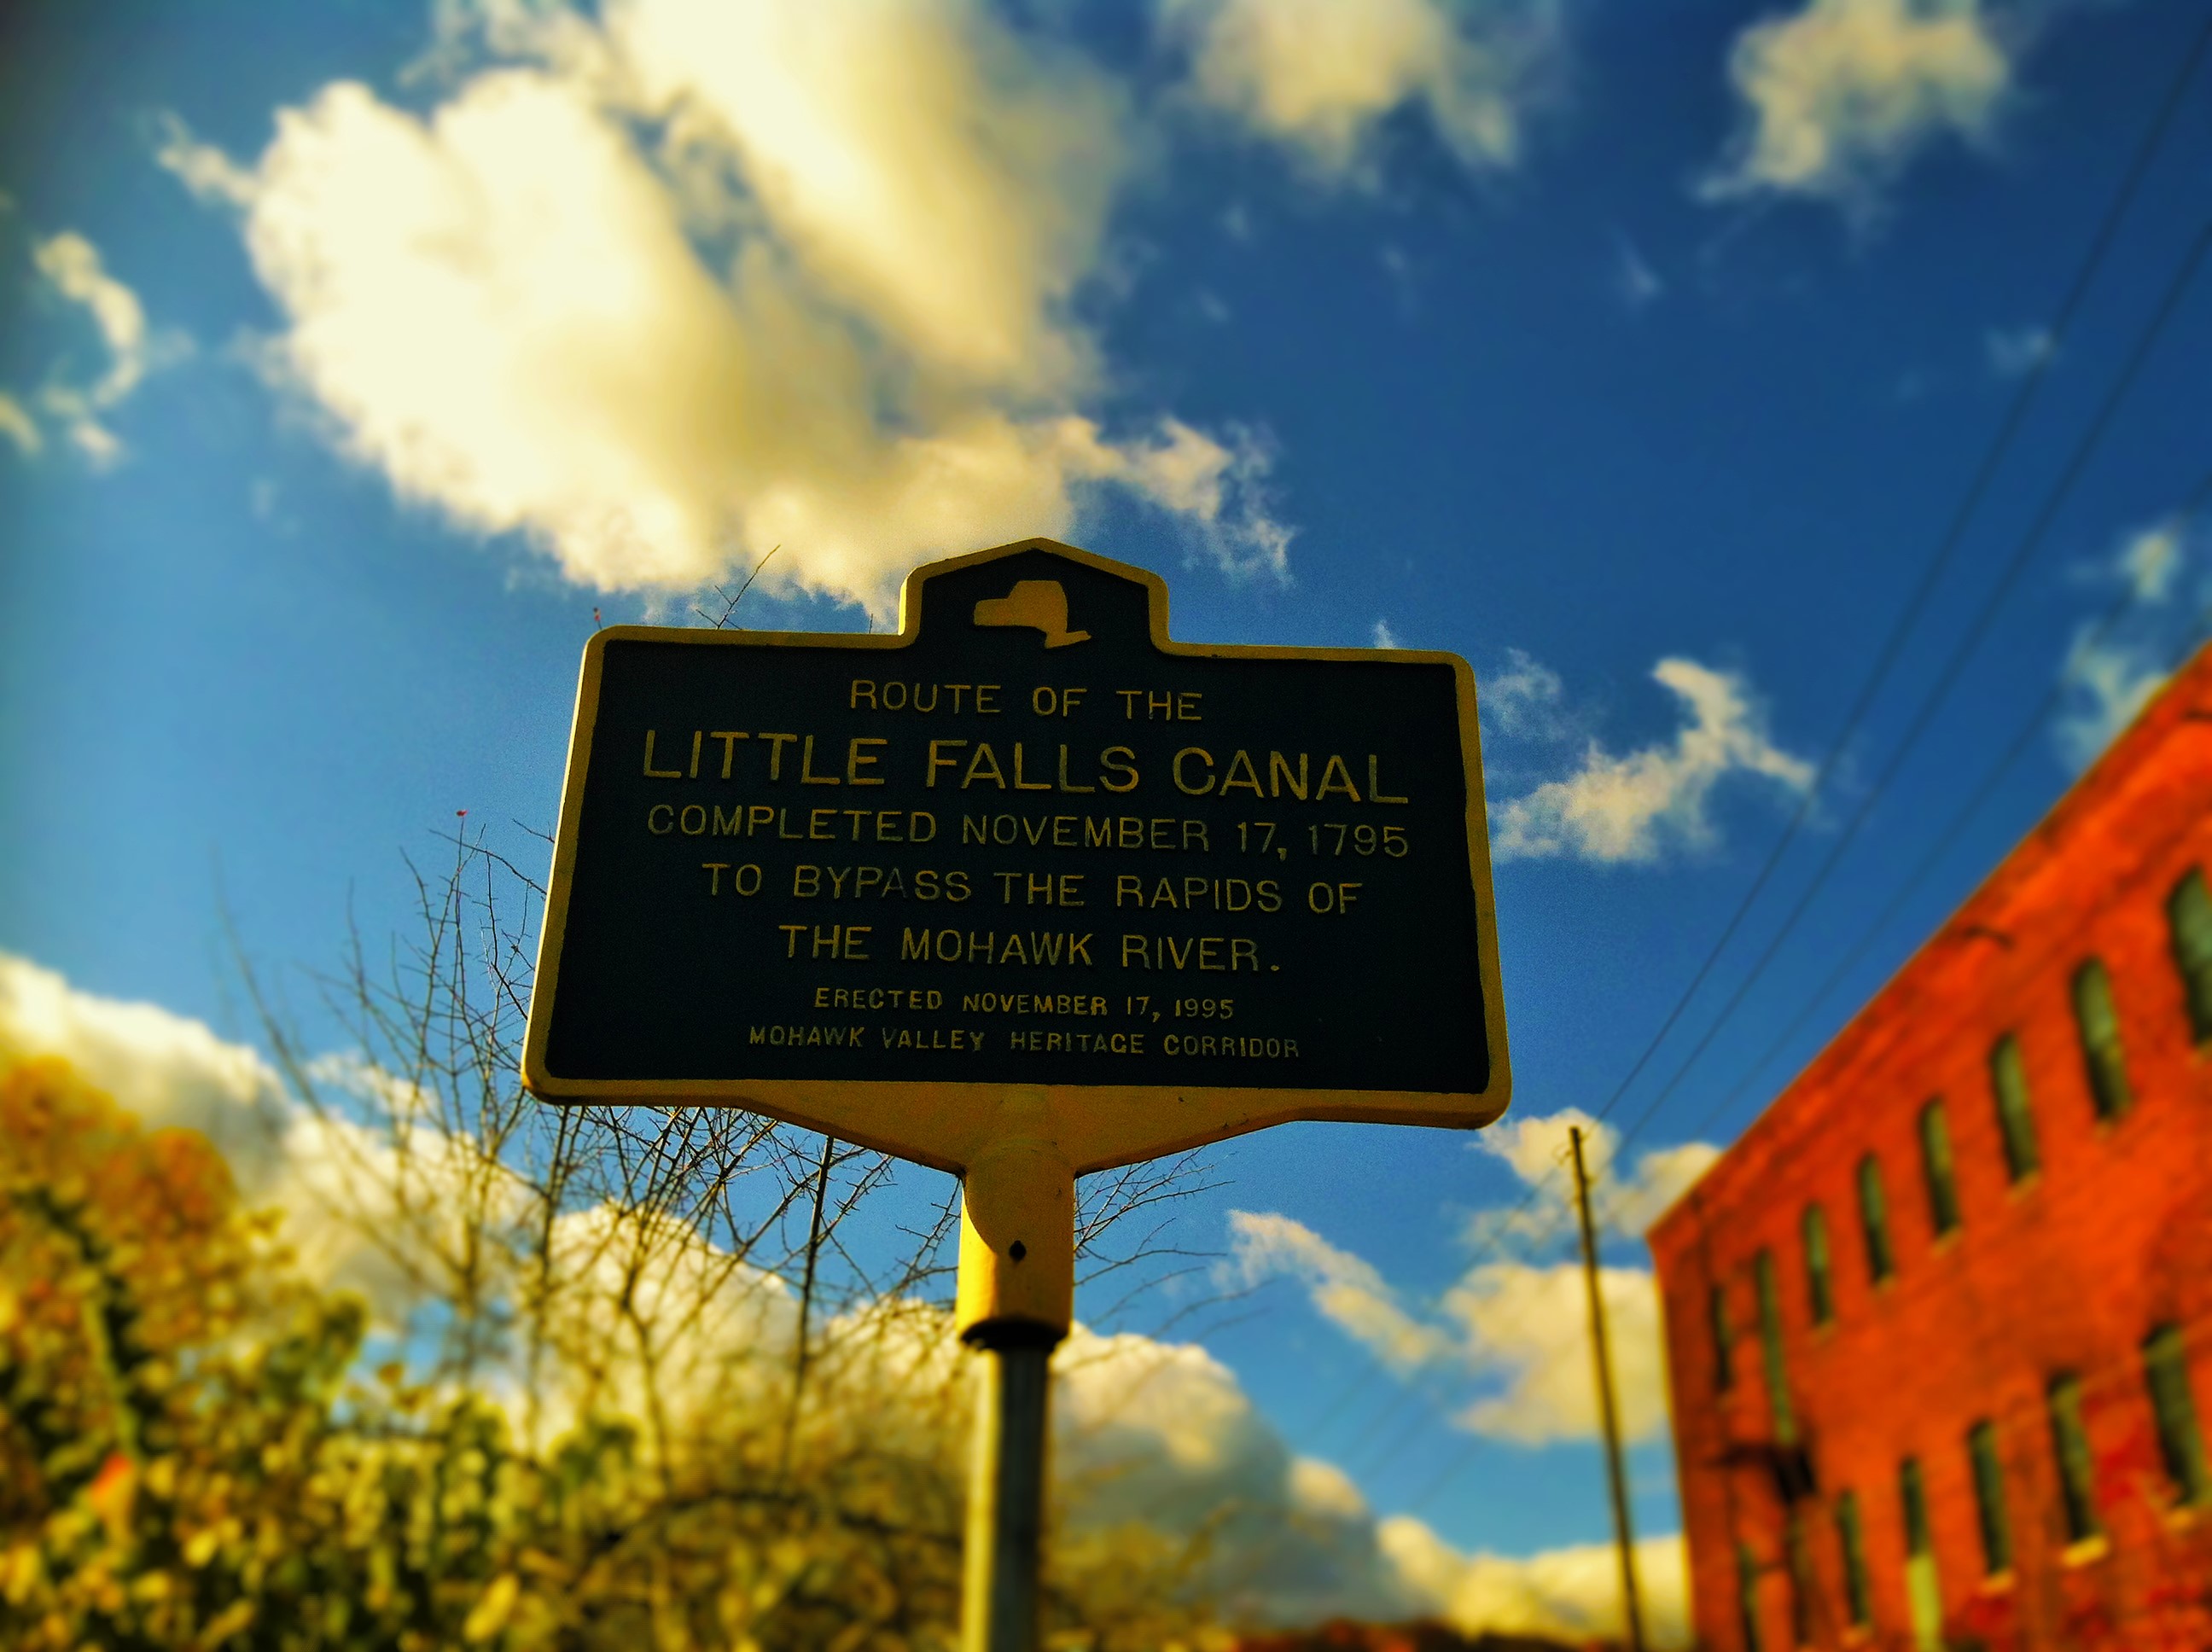 Historical marker at the Little Falls Canal area